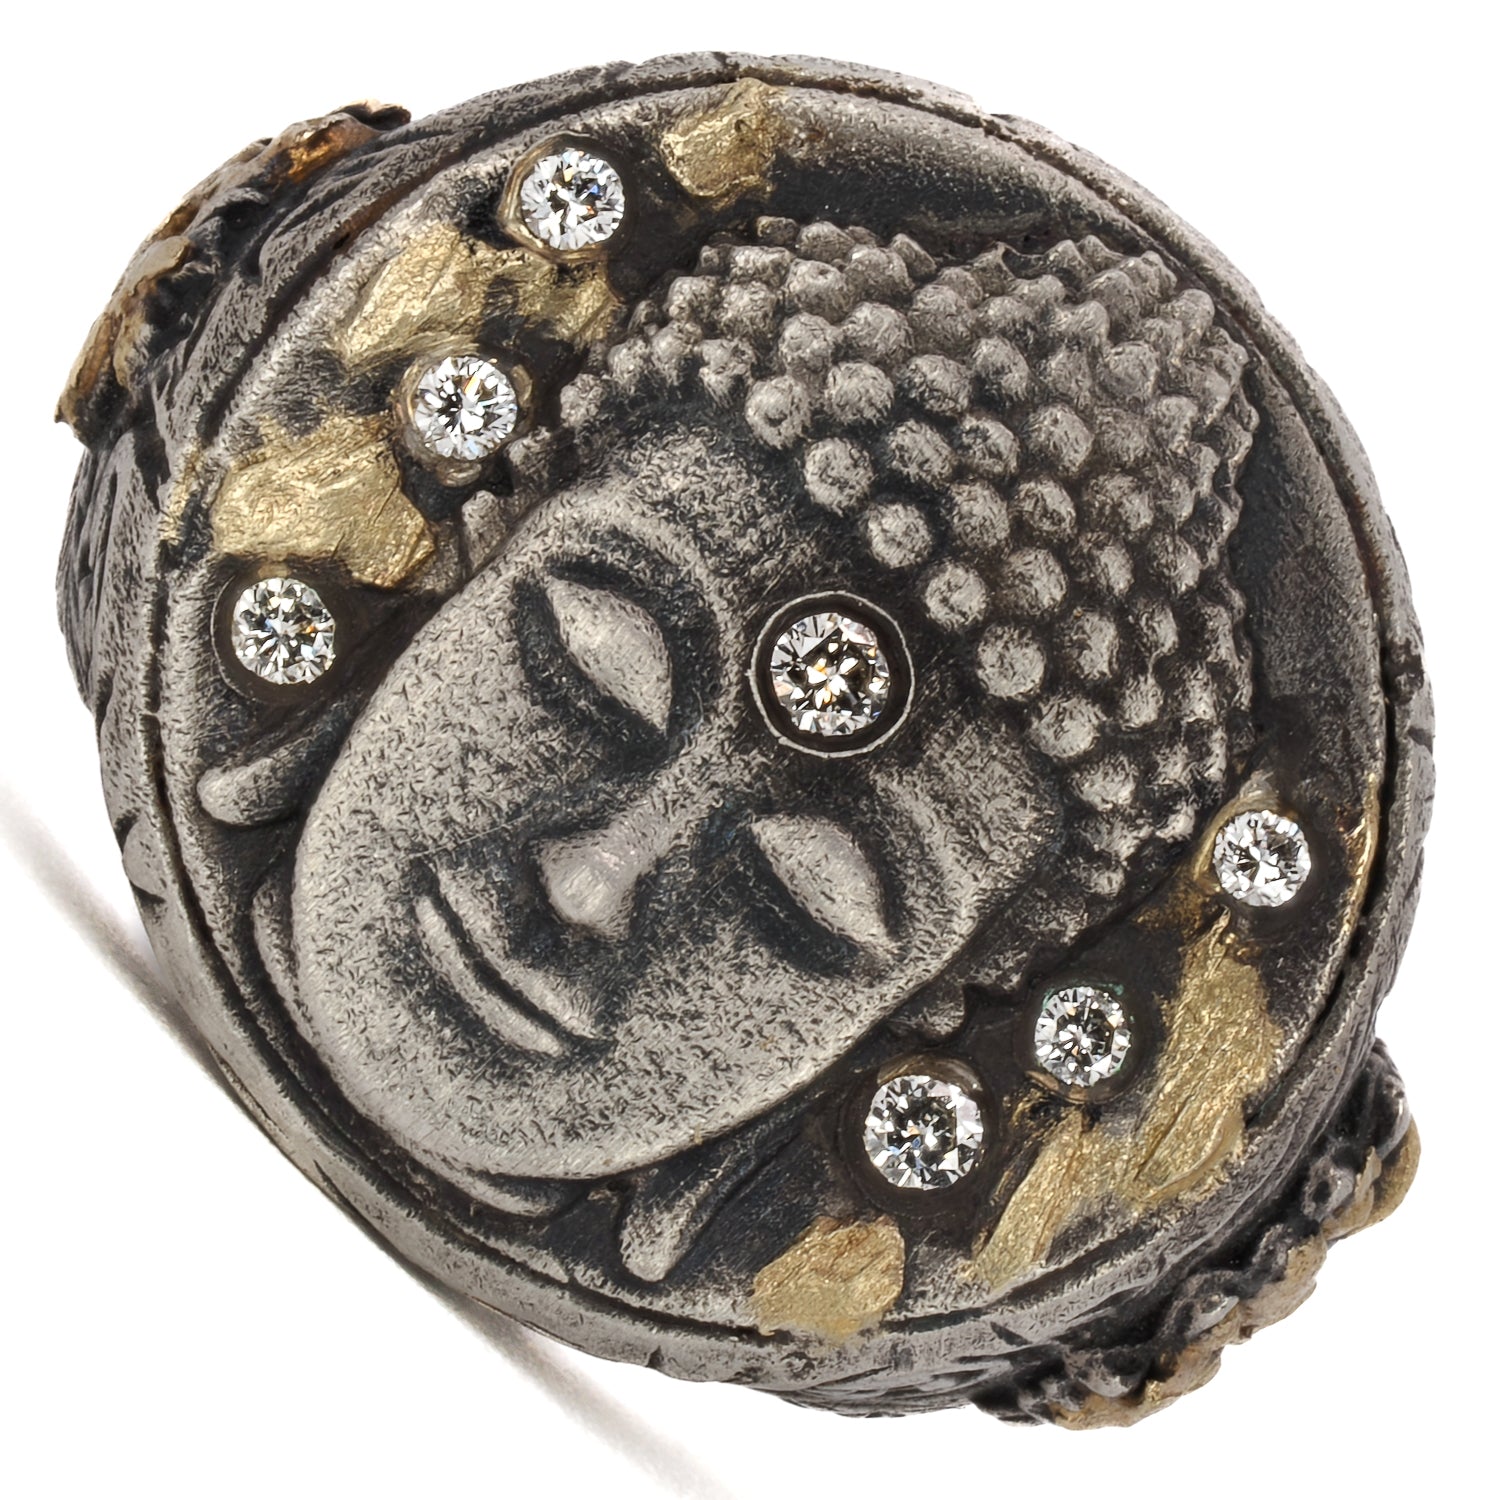 Handcrafted Unique Buddha Ring - Symbols of Peace and Enlightenment.